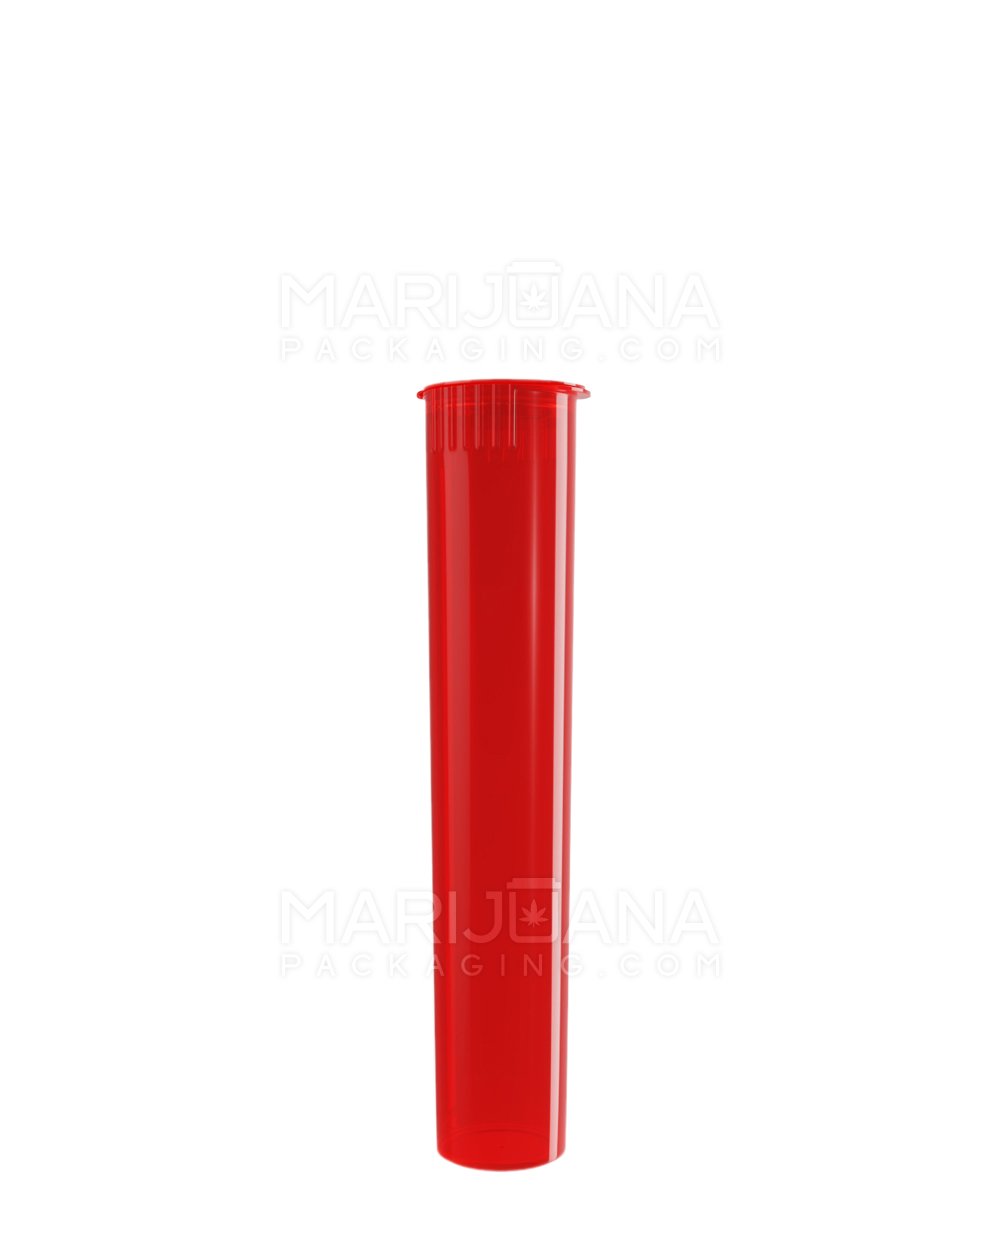 Child Resistant | Pop Top Translucent Plastic Pre-Roll Tubes | 95mm - Red - 1000 Count - 3